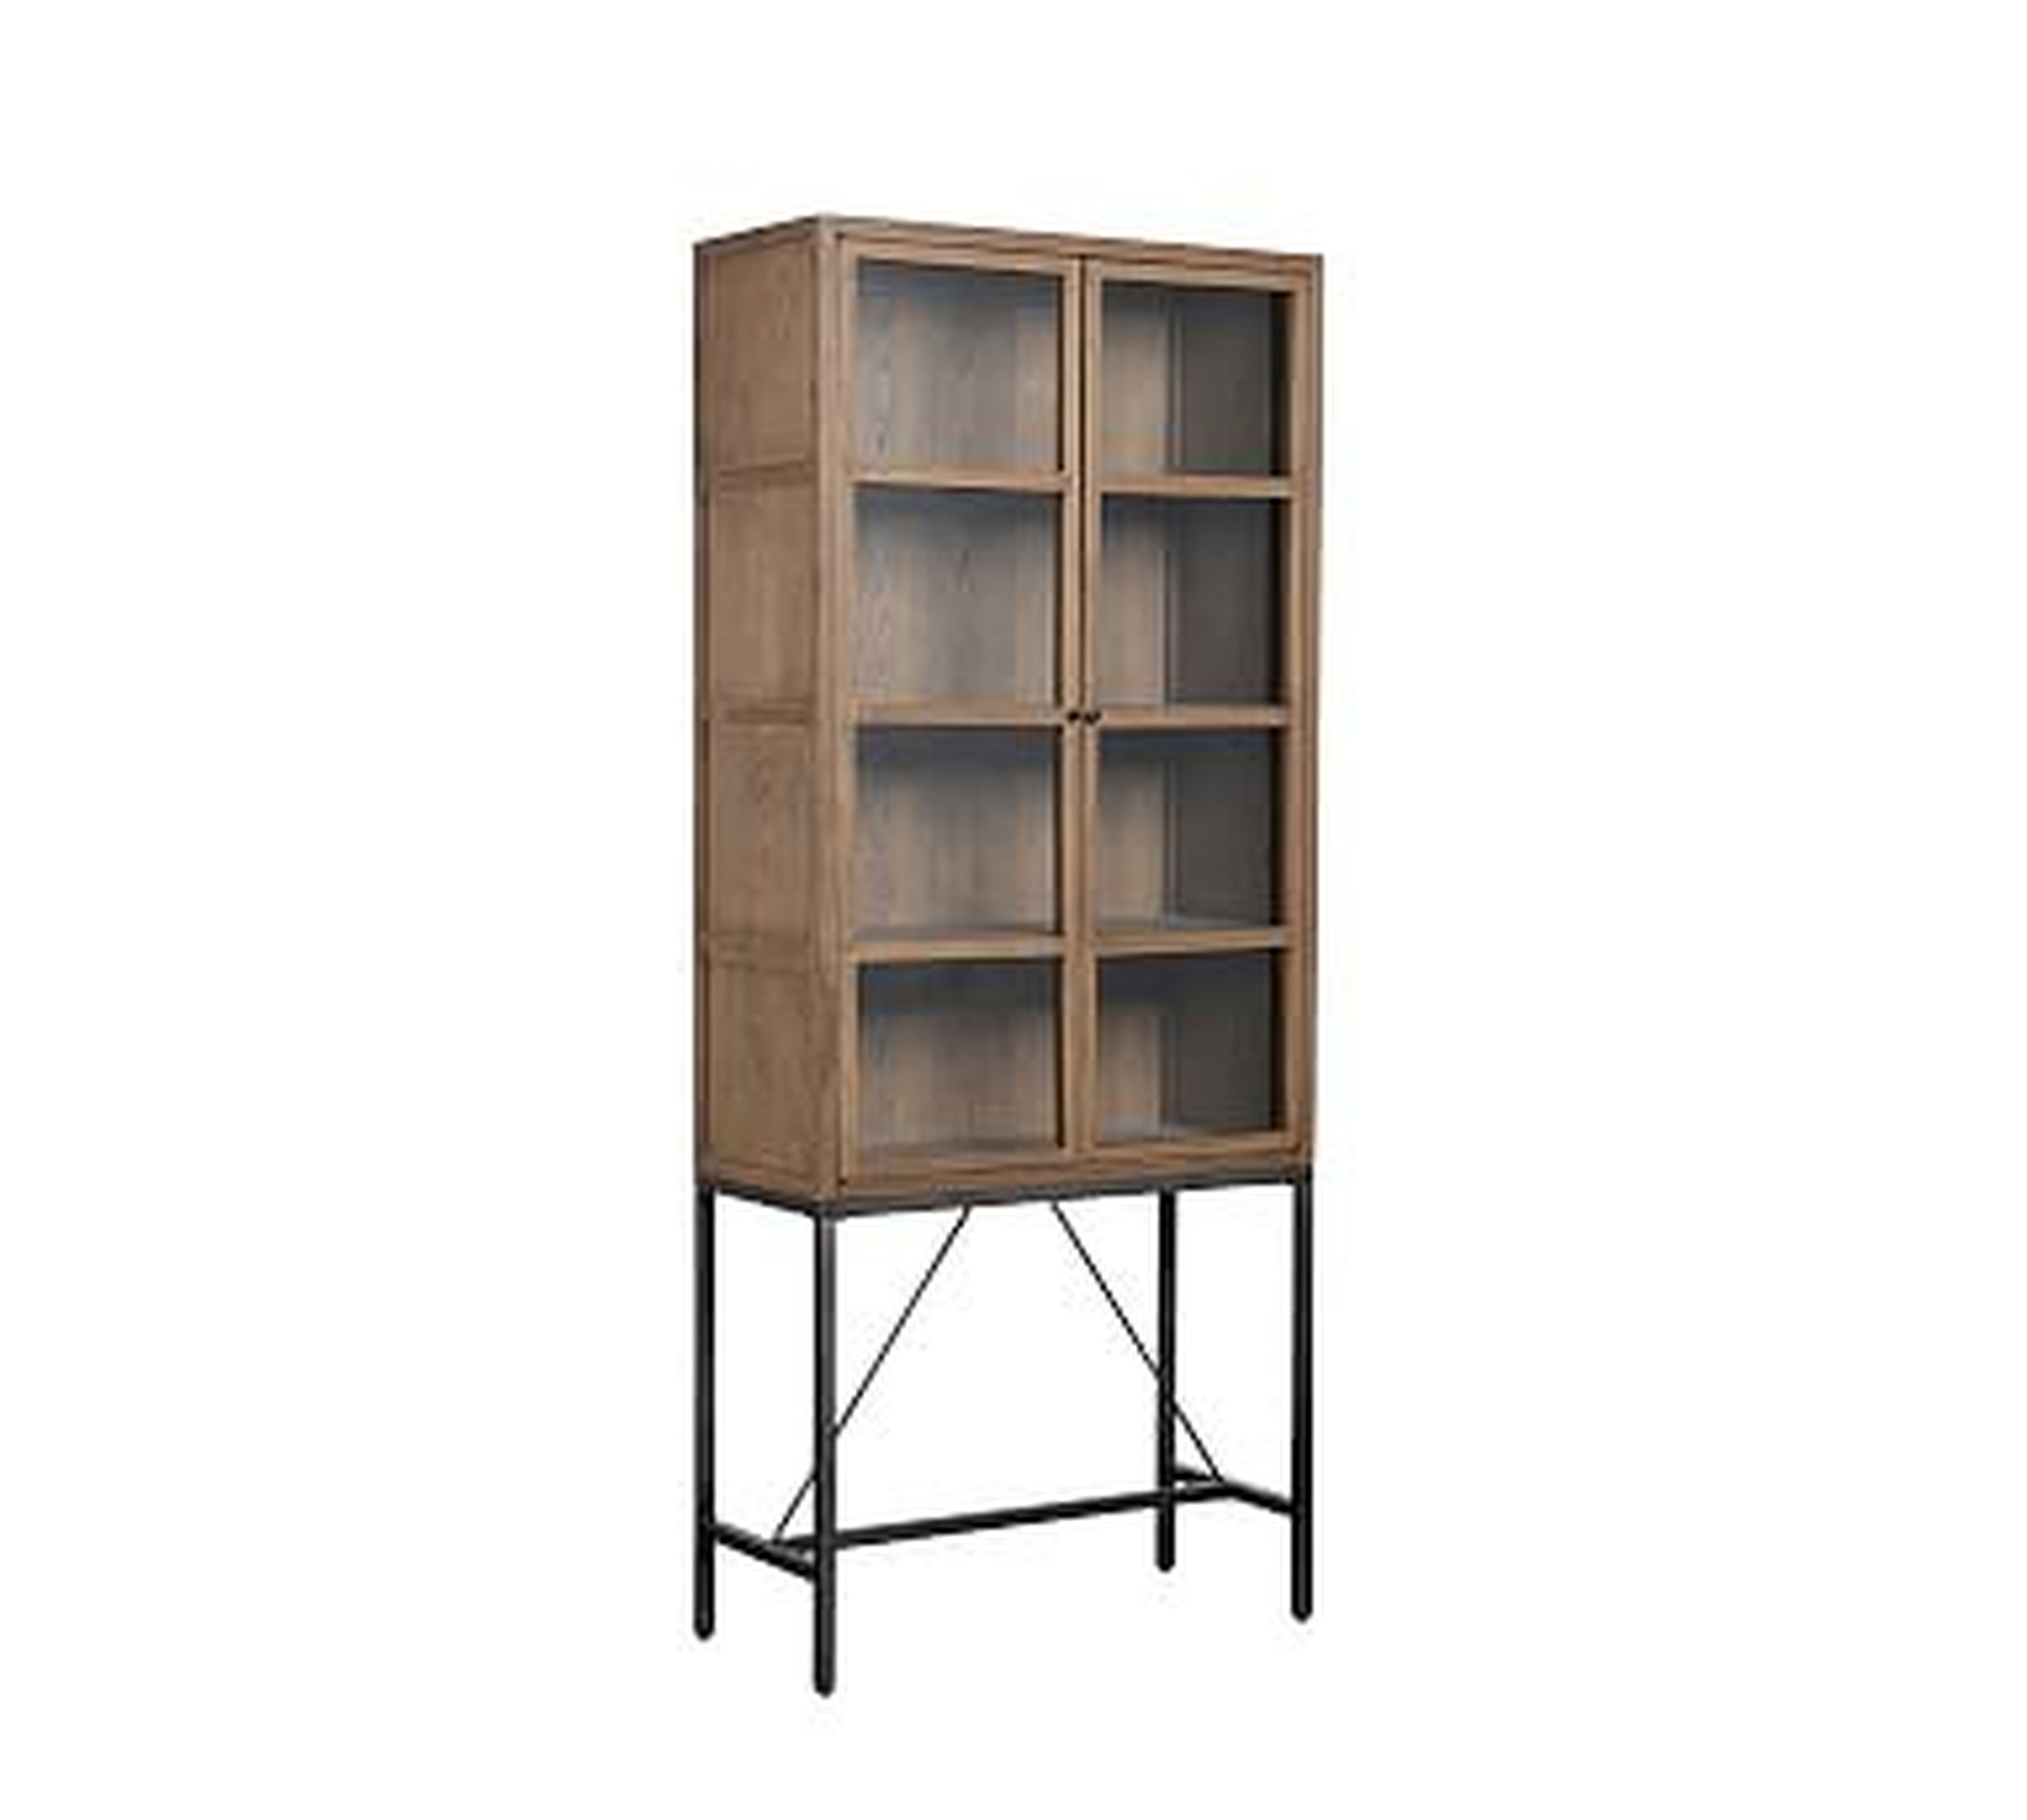 Inglewood Small Display Cabinet, Warm Taupe - Pottery Barn